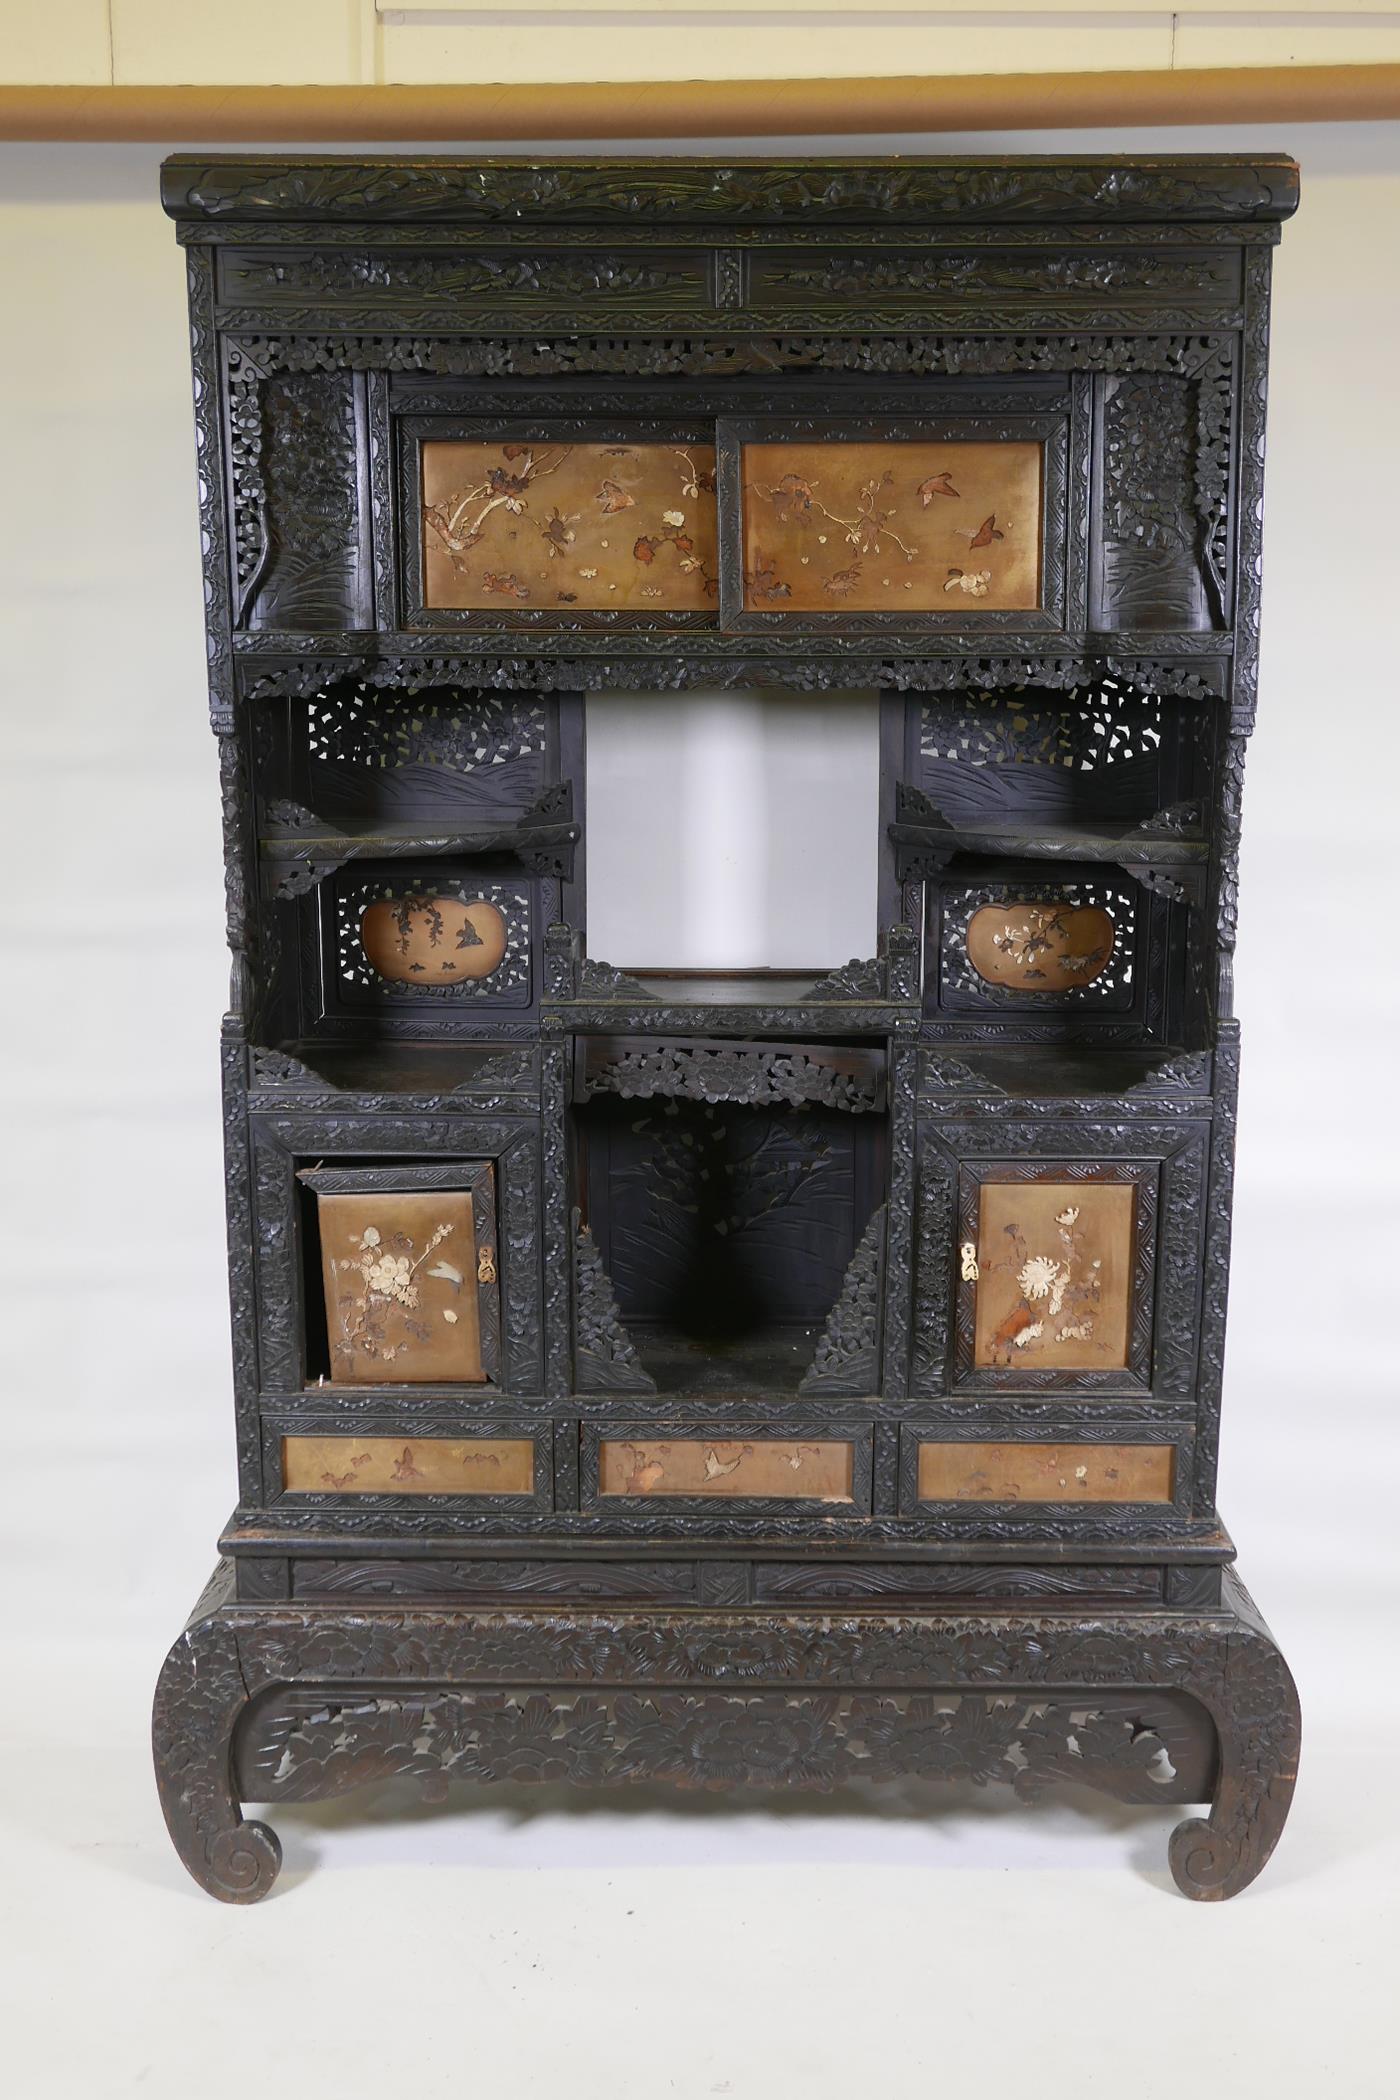 A Japanese Meiji period (1868-1912) two section shodhana, with carved decoration and inlaid